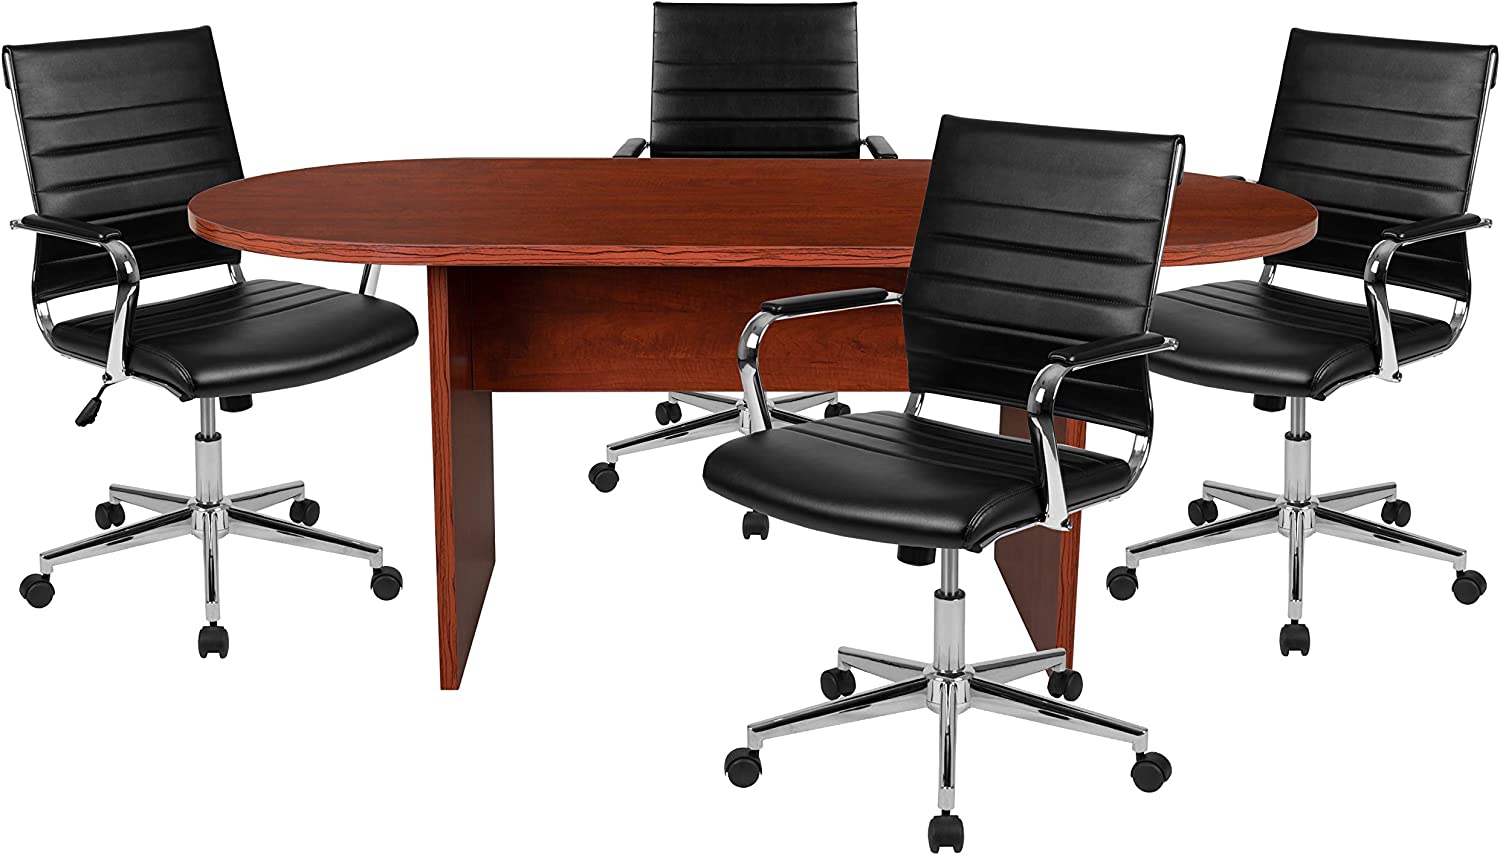 Flash Furniture 5 Piece Cherry Oval Conference Table Set with 4 Black LeatherSoft Ribbed Executive Chairs